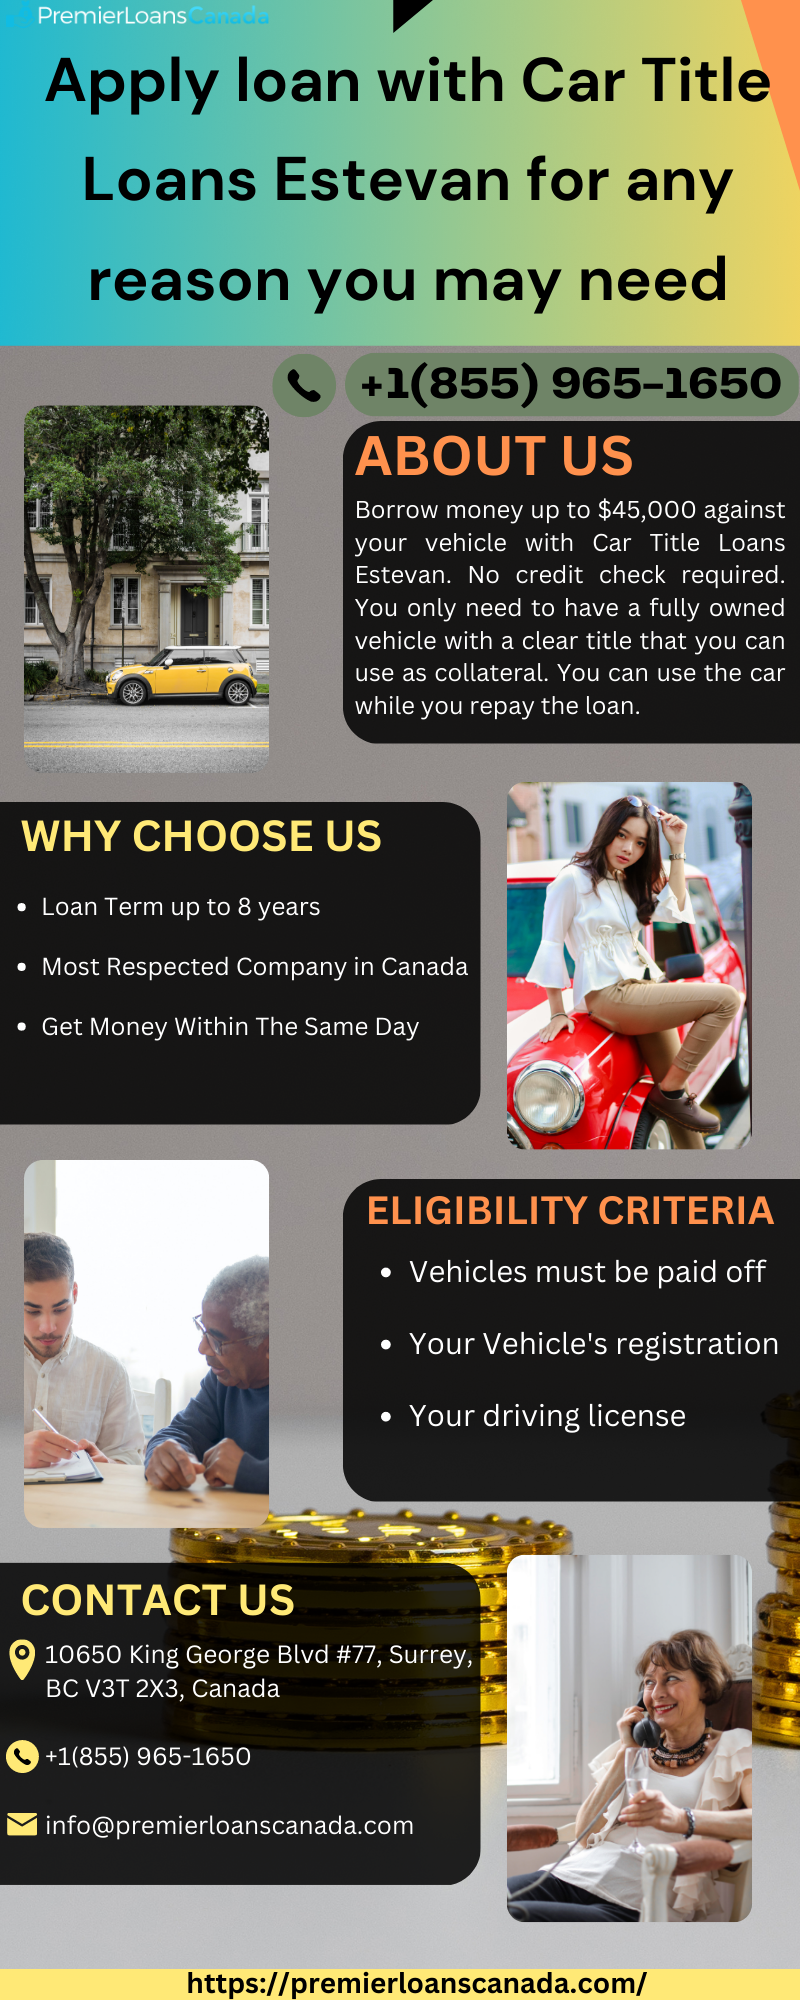 Apply loan with Car Title Loans Estevan for any reason you may need